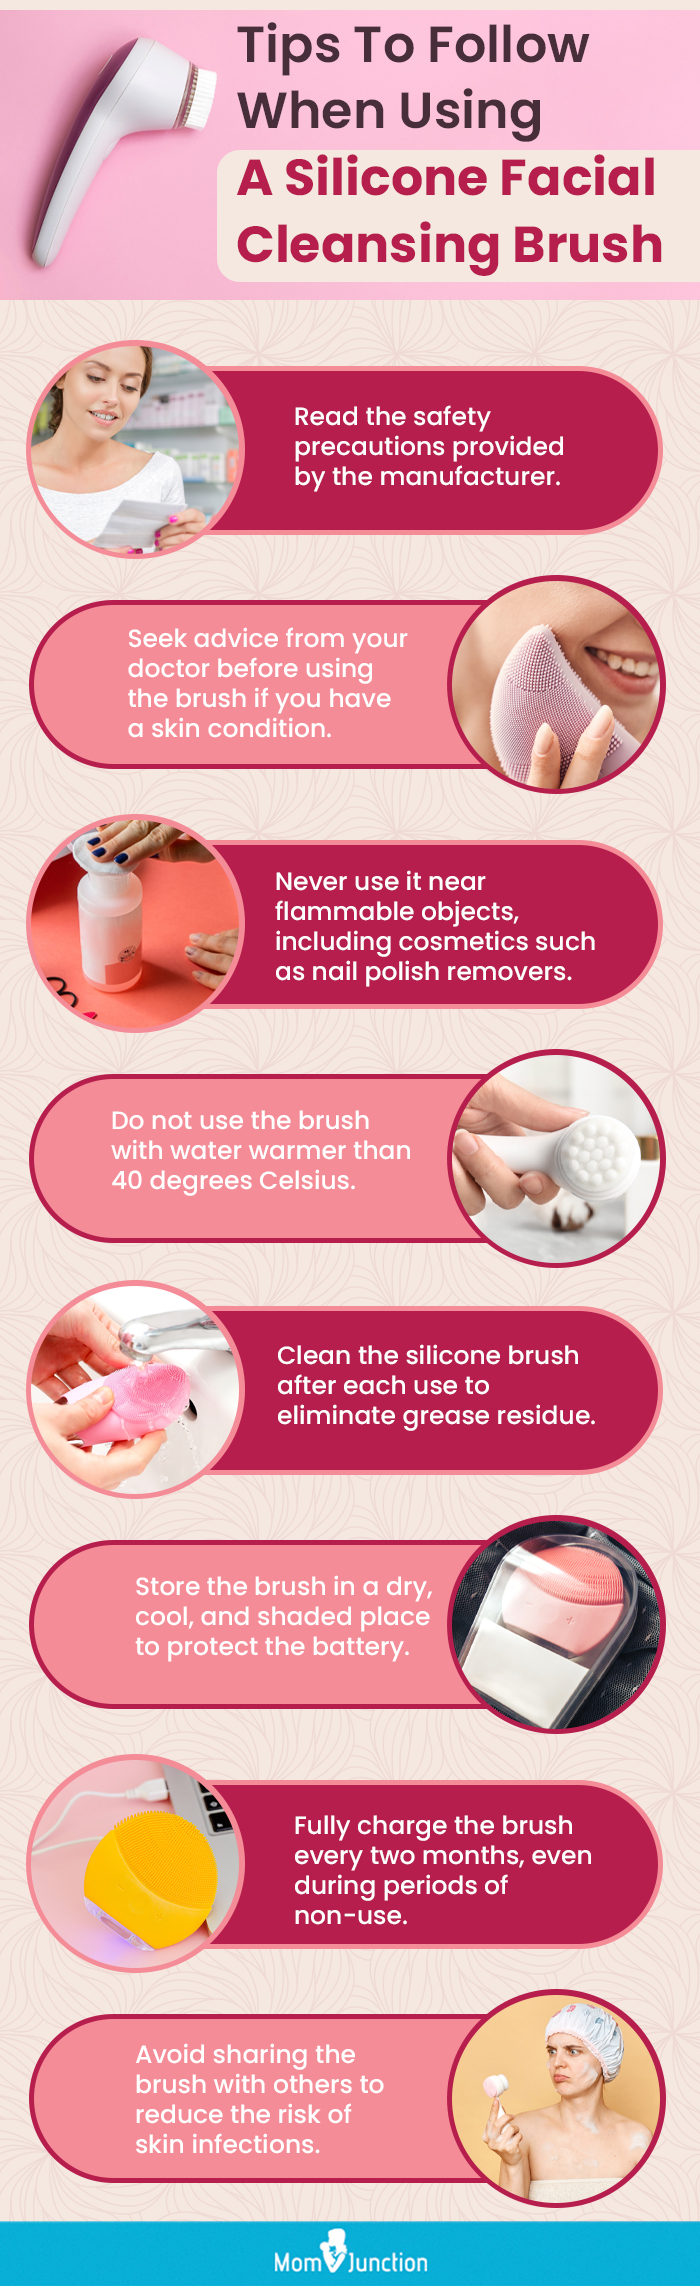 Tips To Follow When Using A Silicone Facial Cleansing Brush (infographic)